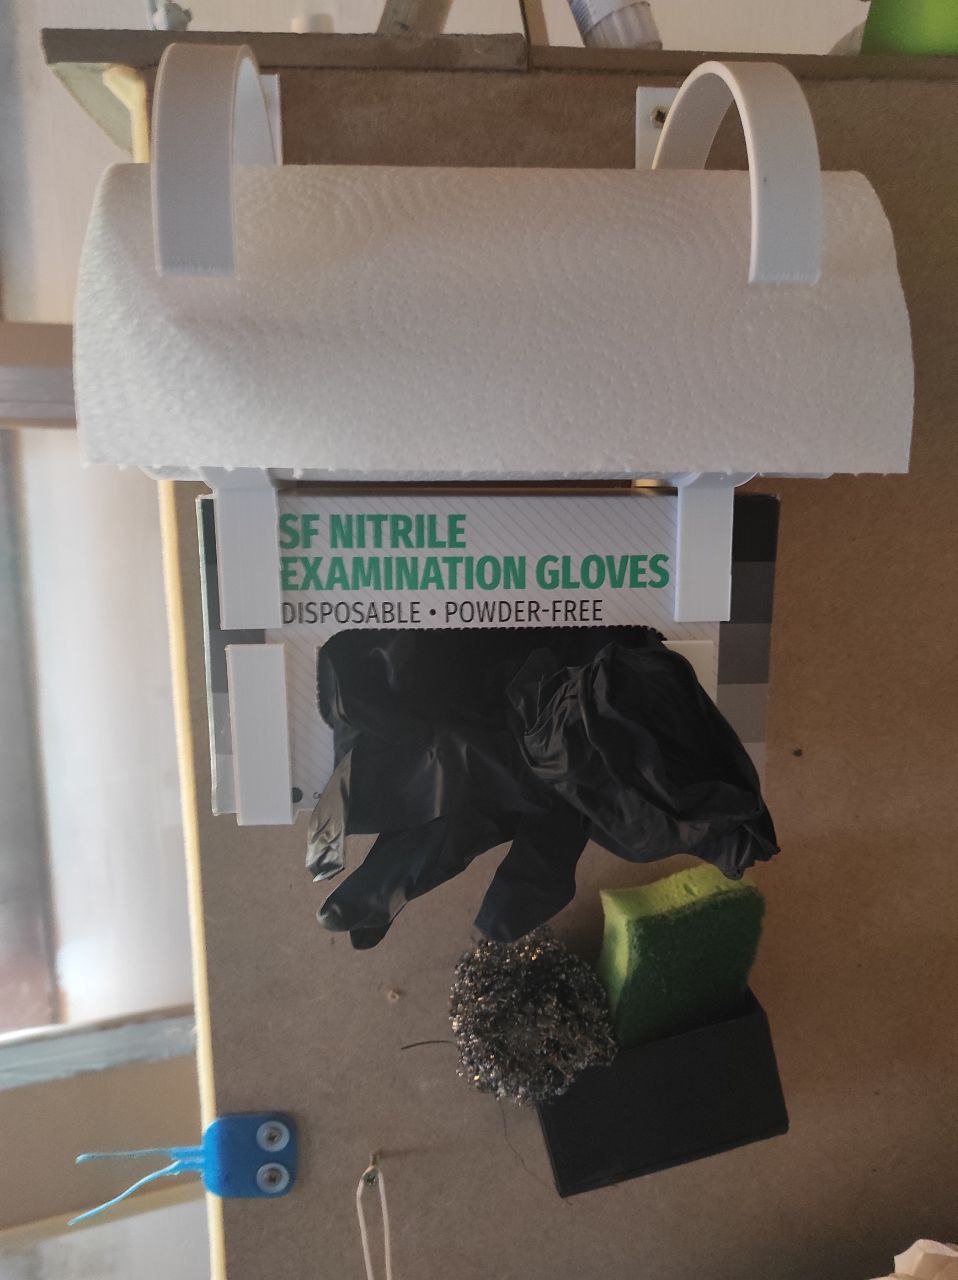 Wall holder for gloves and paper towels - minimalist